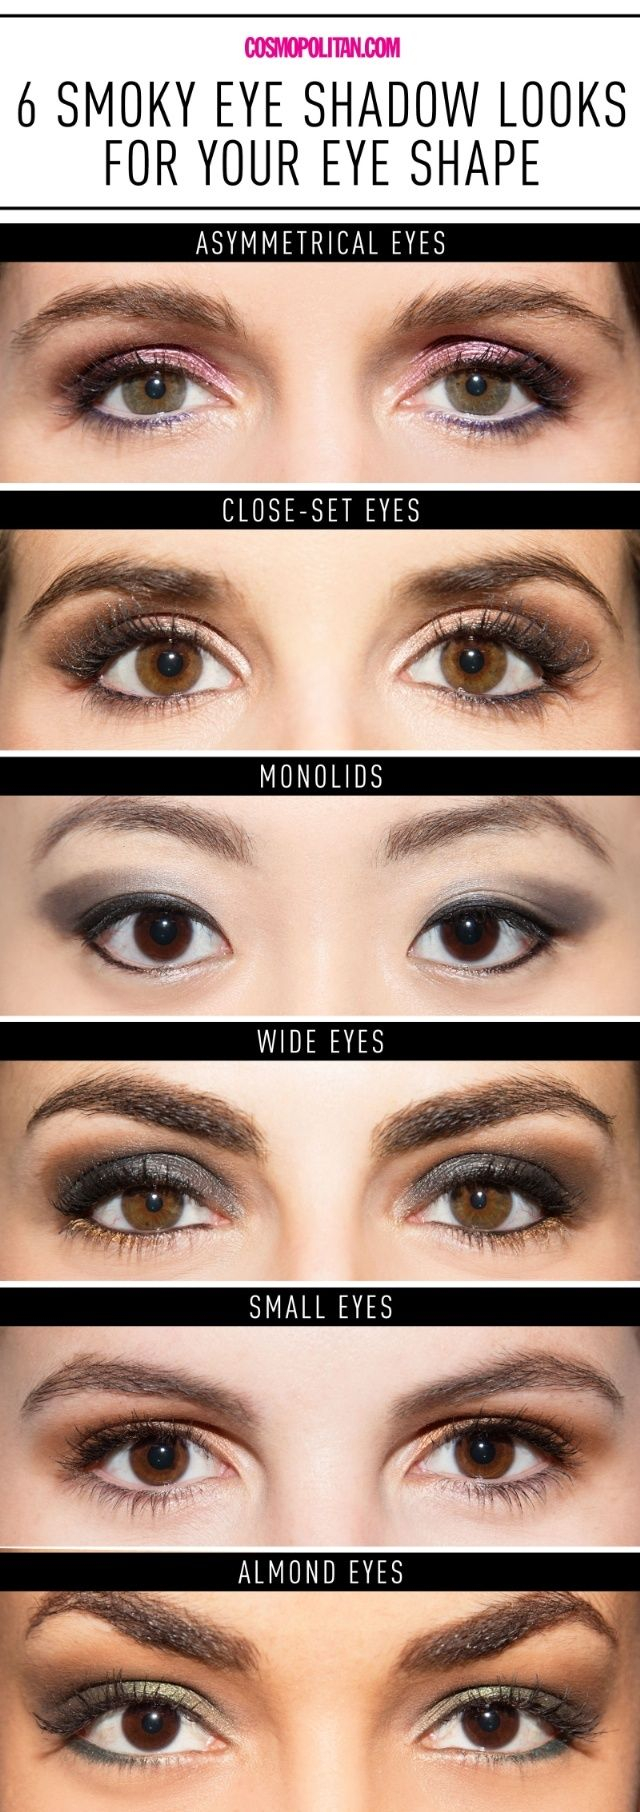 Makeup For Different Eye Shapes 6 Perfect Smoky Eye Looks For Your Eye Shape If I Had Money Id